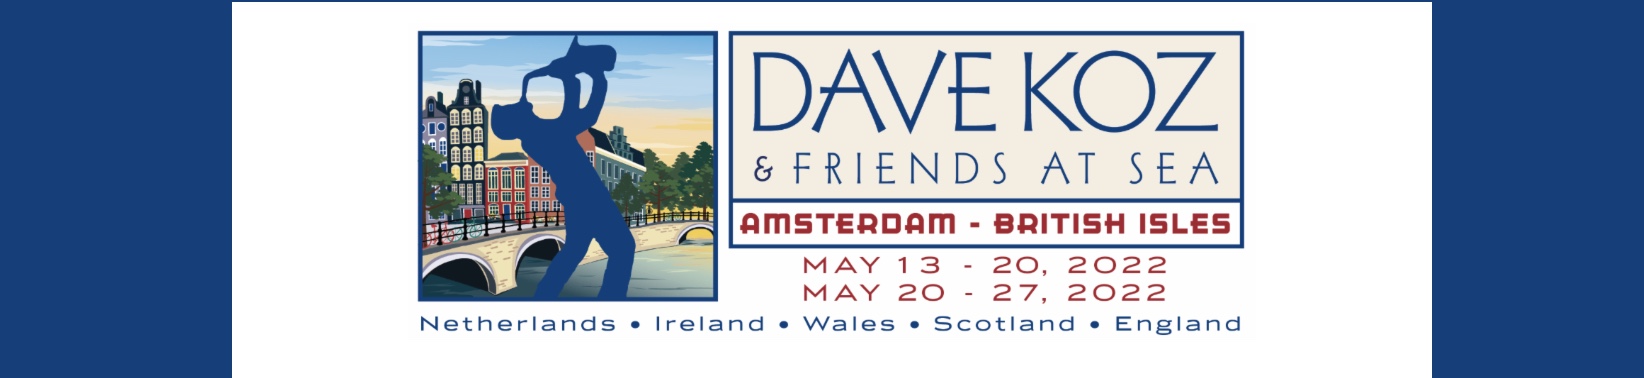 Dave Koz and Friends At Sea 2022 Tickets